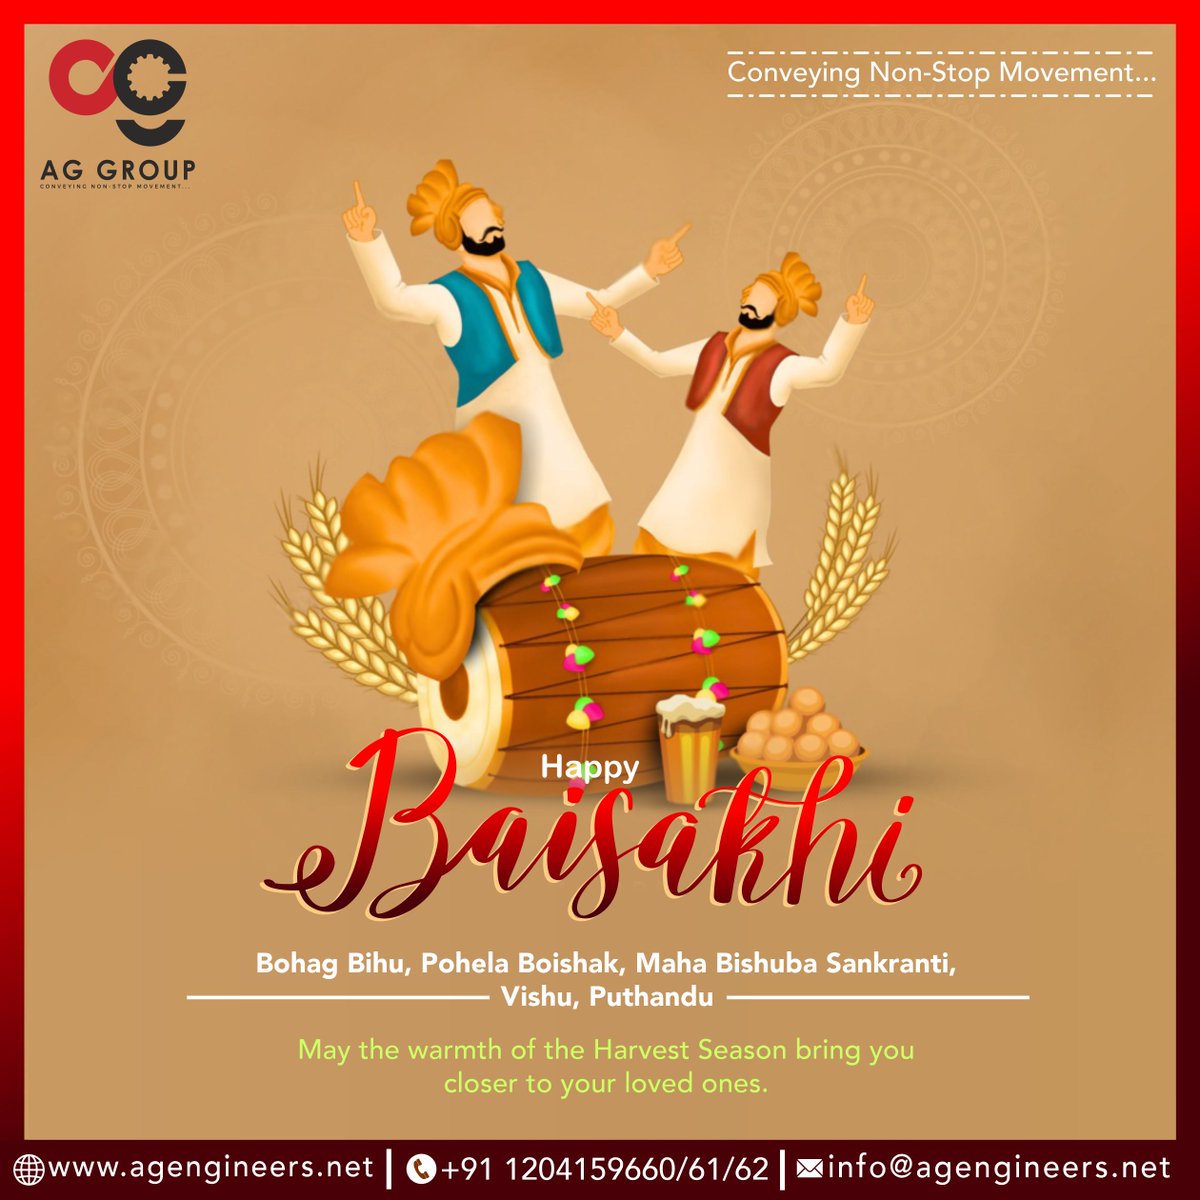 May the vibrant colors of Baisakhi fill your life with joy, prosperity, and endless blessings! Happy Baisakhi to all celebrating this beautiful festival of harvest and new beginnings.
#aggroup #agengineers #conveyor #conveyorbelts #modularbelts #conveyorsystems #conveyorsolution